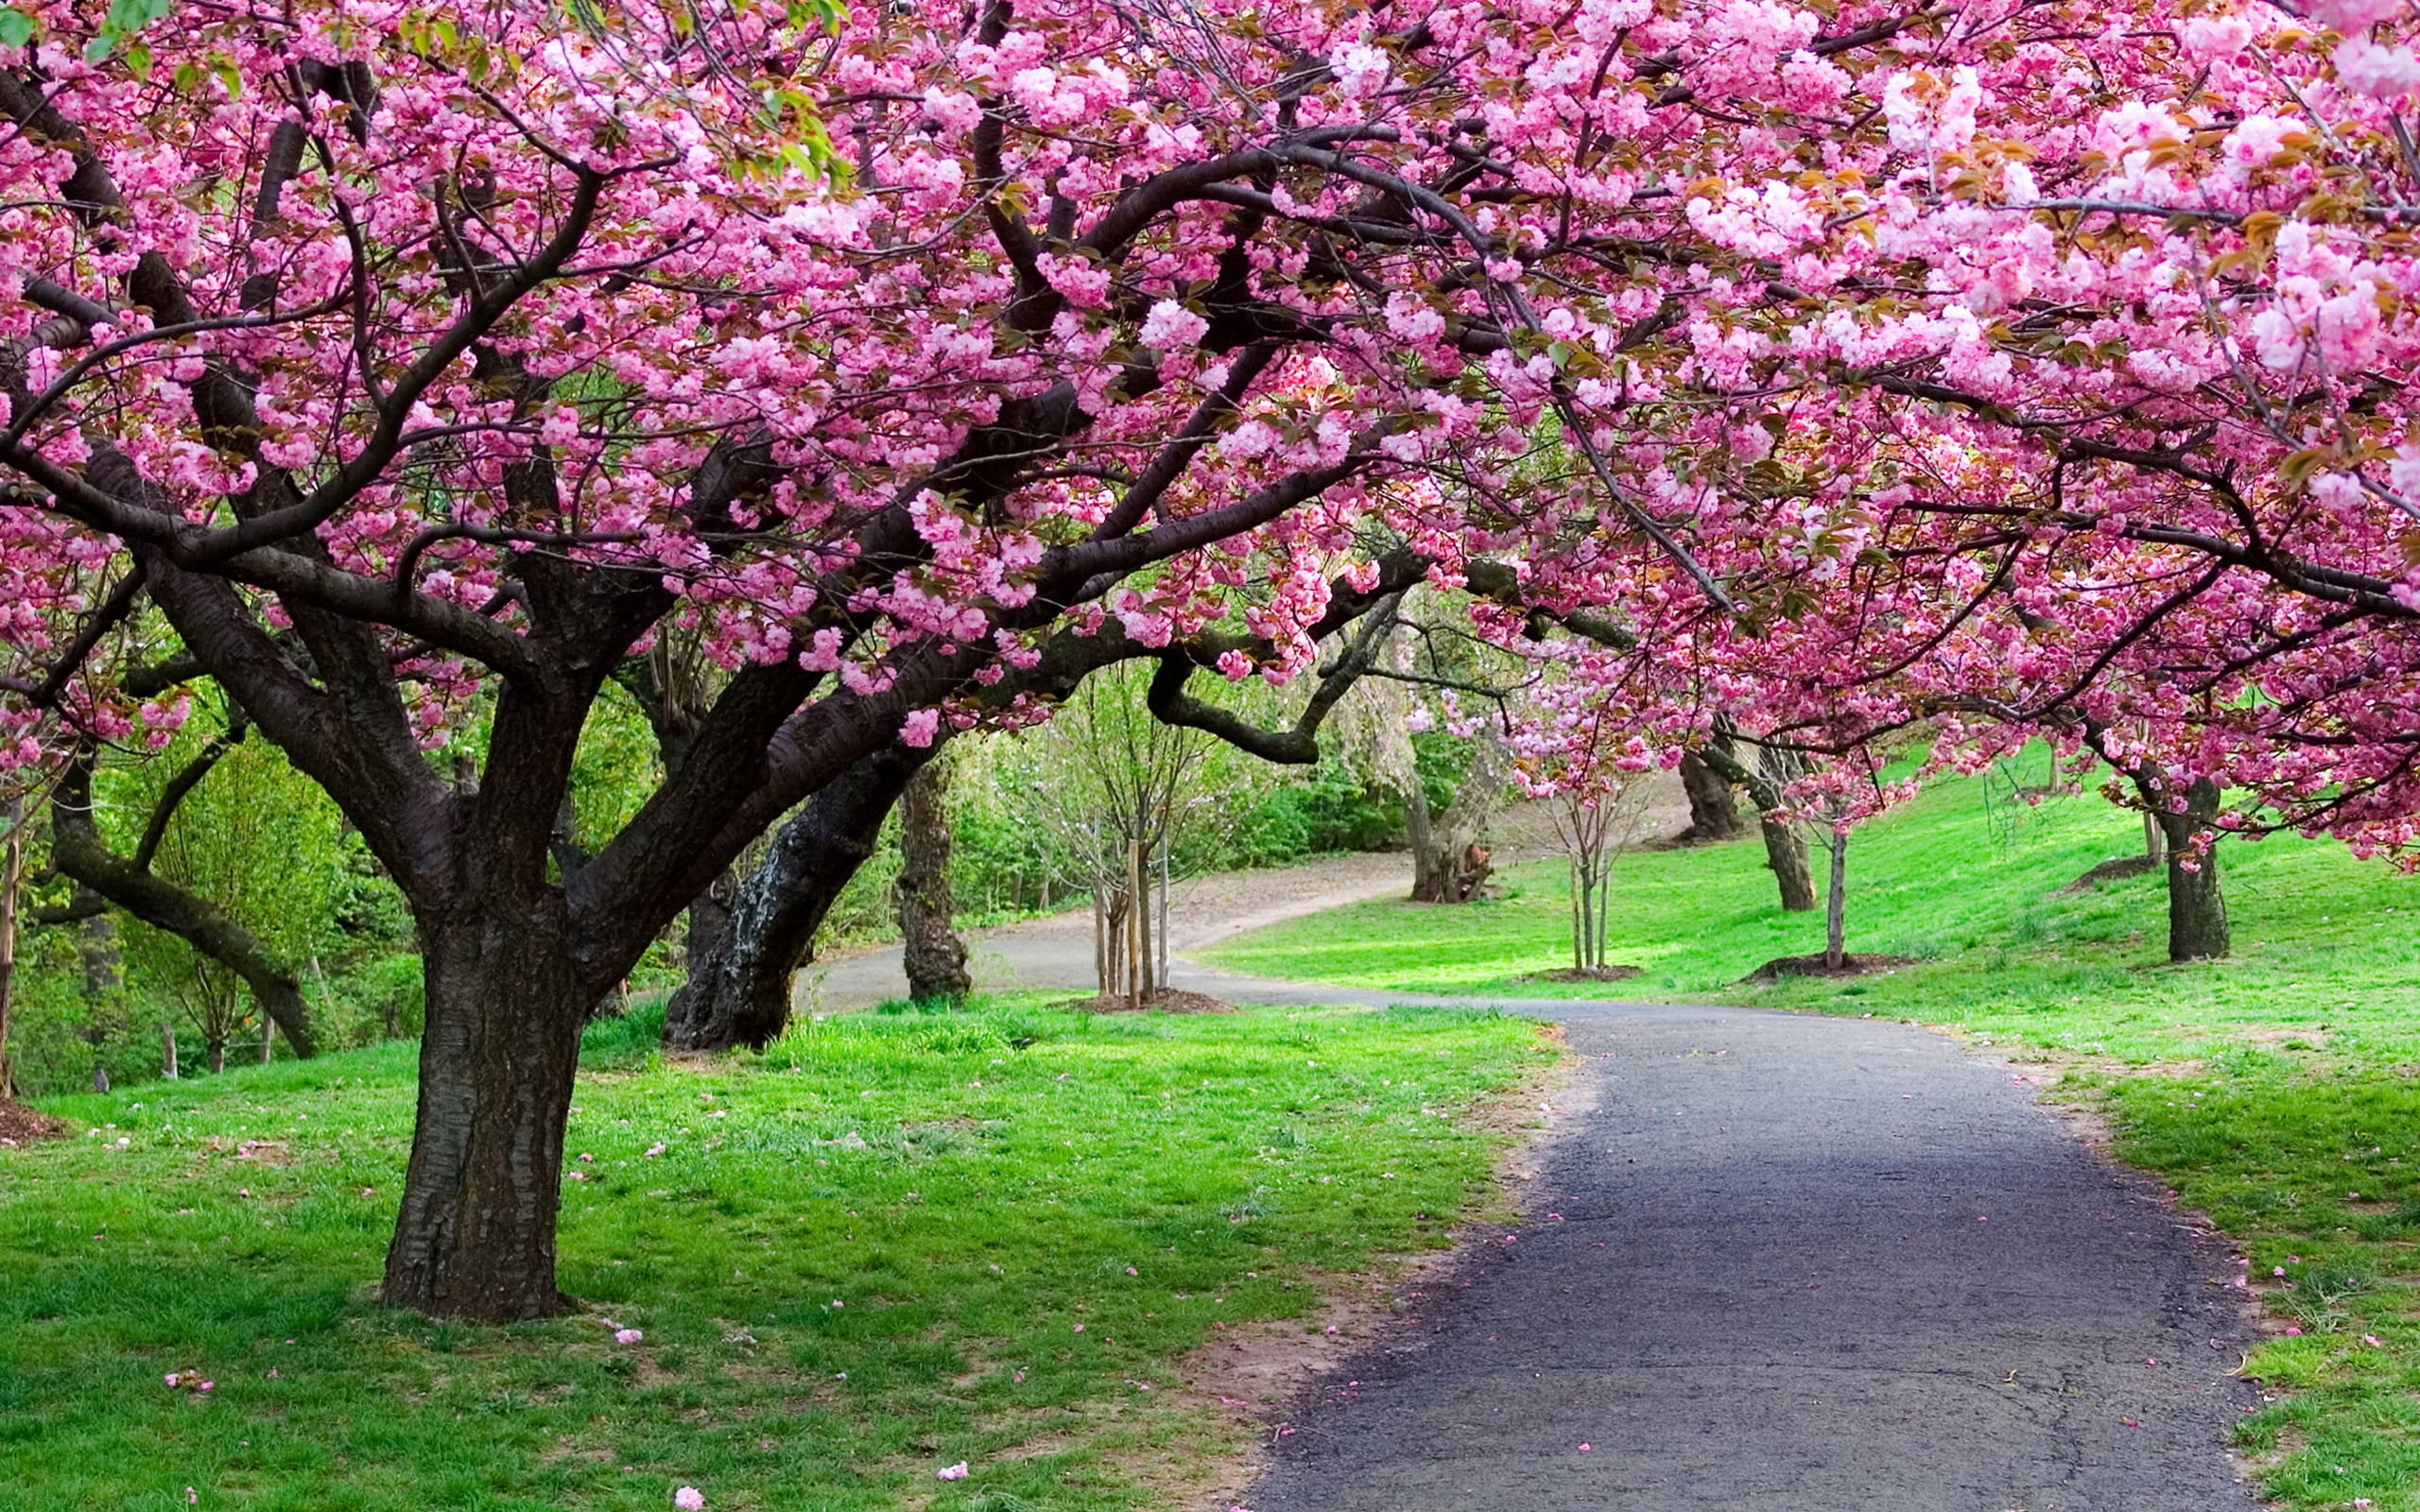 pathway surrounded by green grasses and cherry blossom trees